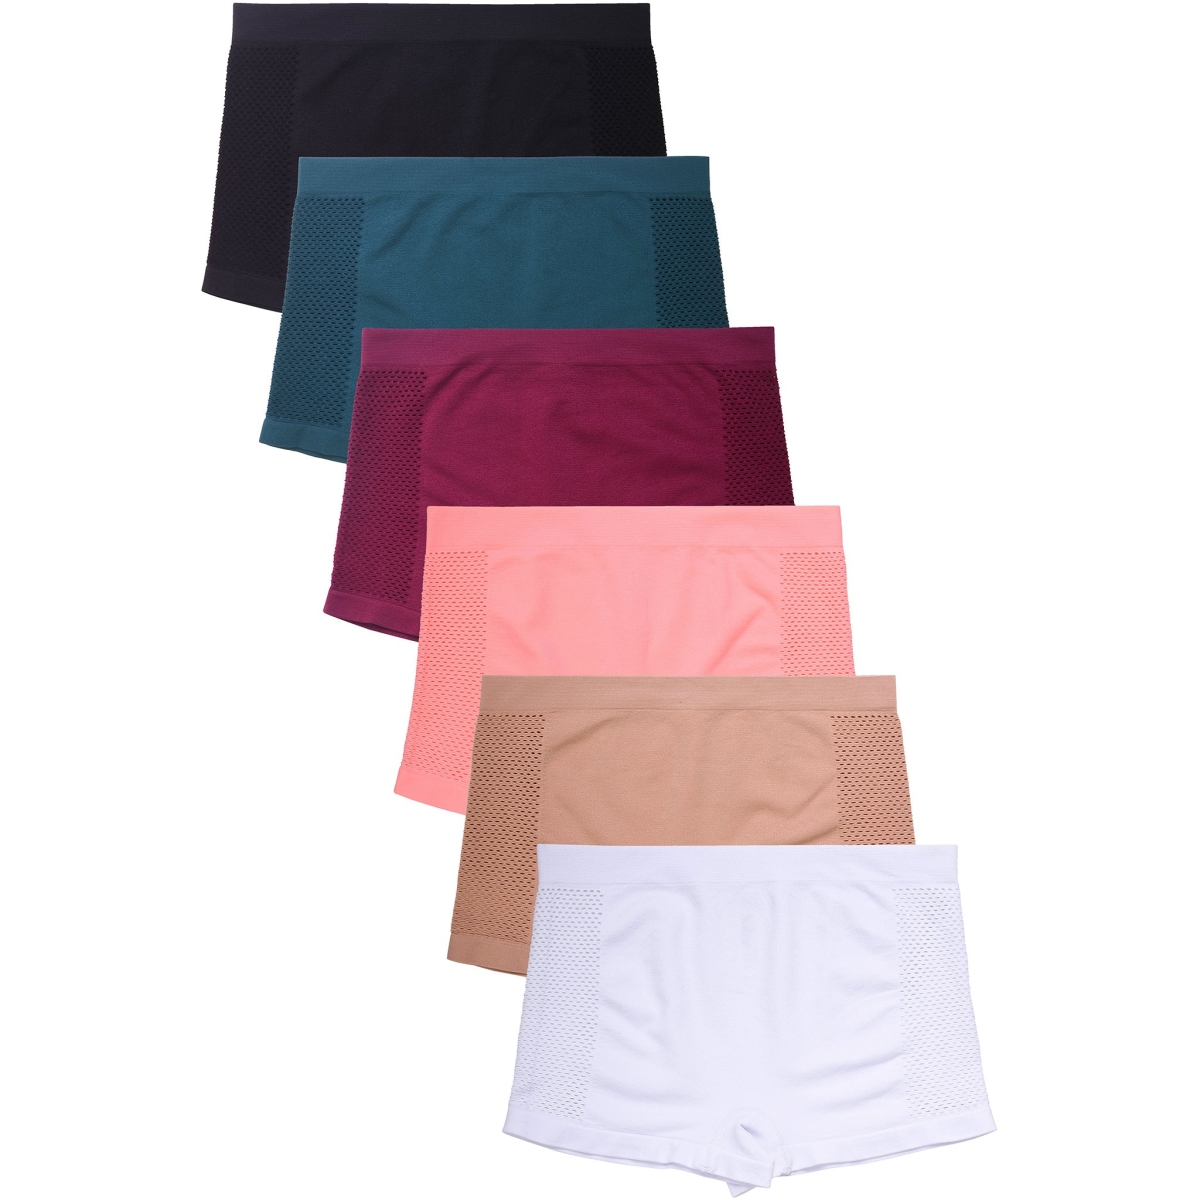 Picture of 247 Frenzy 247-LP0234SB1 Mamia Womens Essentials Seamless Nylon Stretch Boyshort Panty Underwear - Assorted Color - One Size - Pack of 6